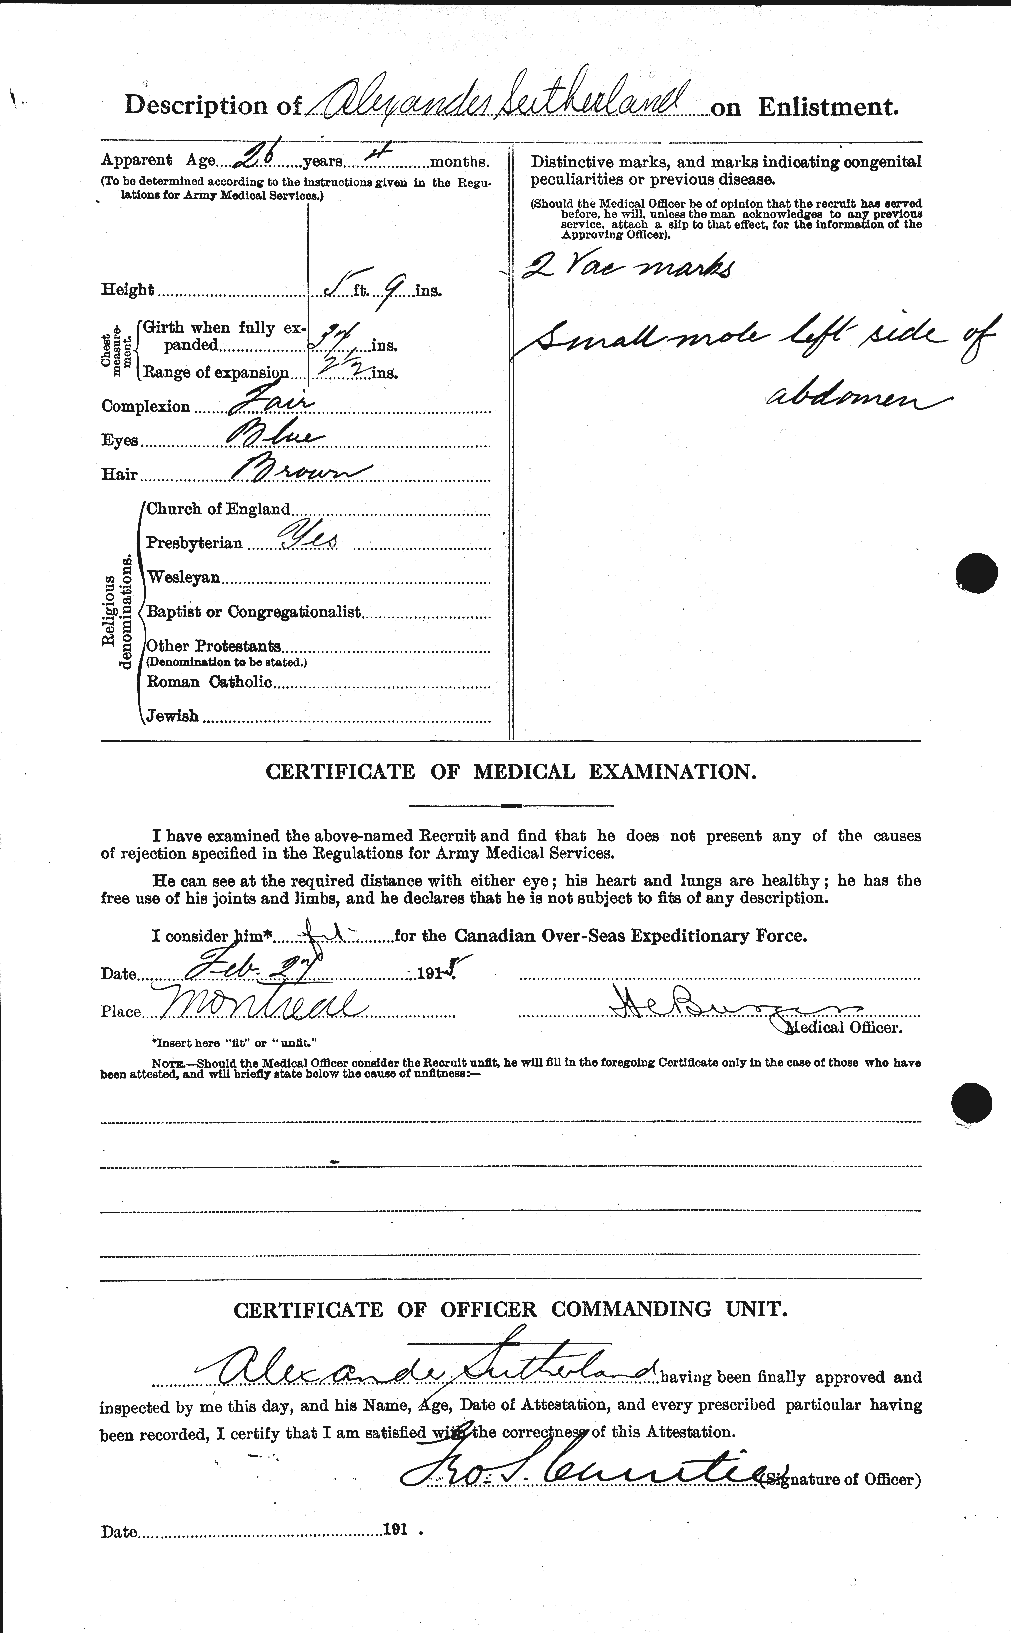 Personnel Records of the First World War - CEF 125360b